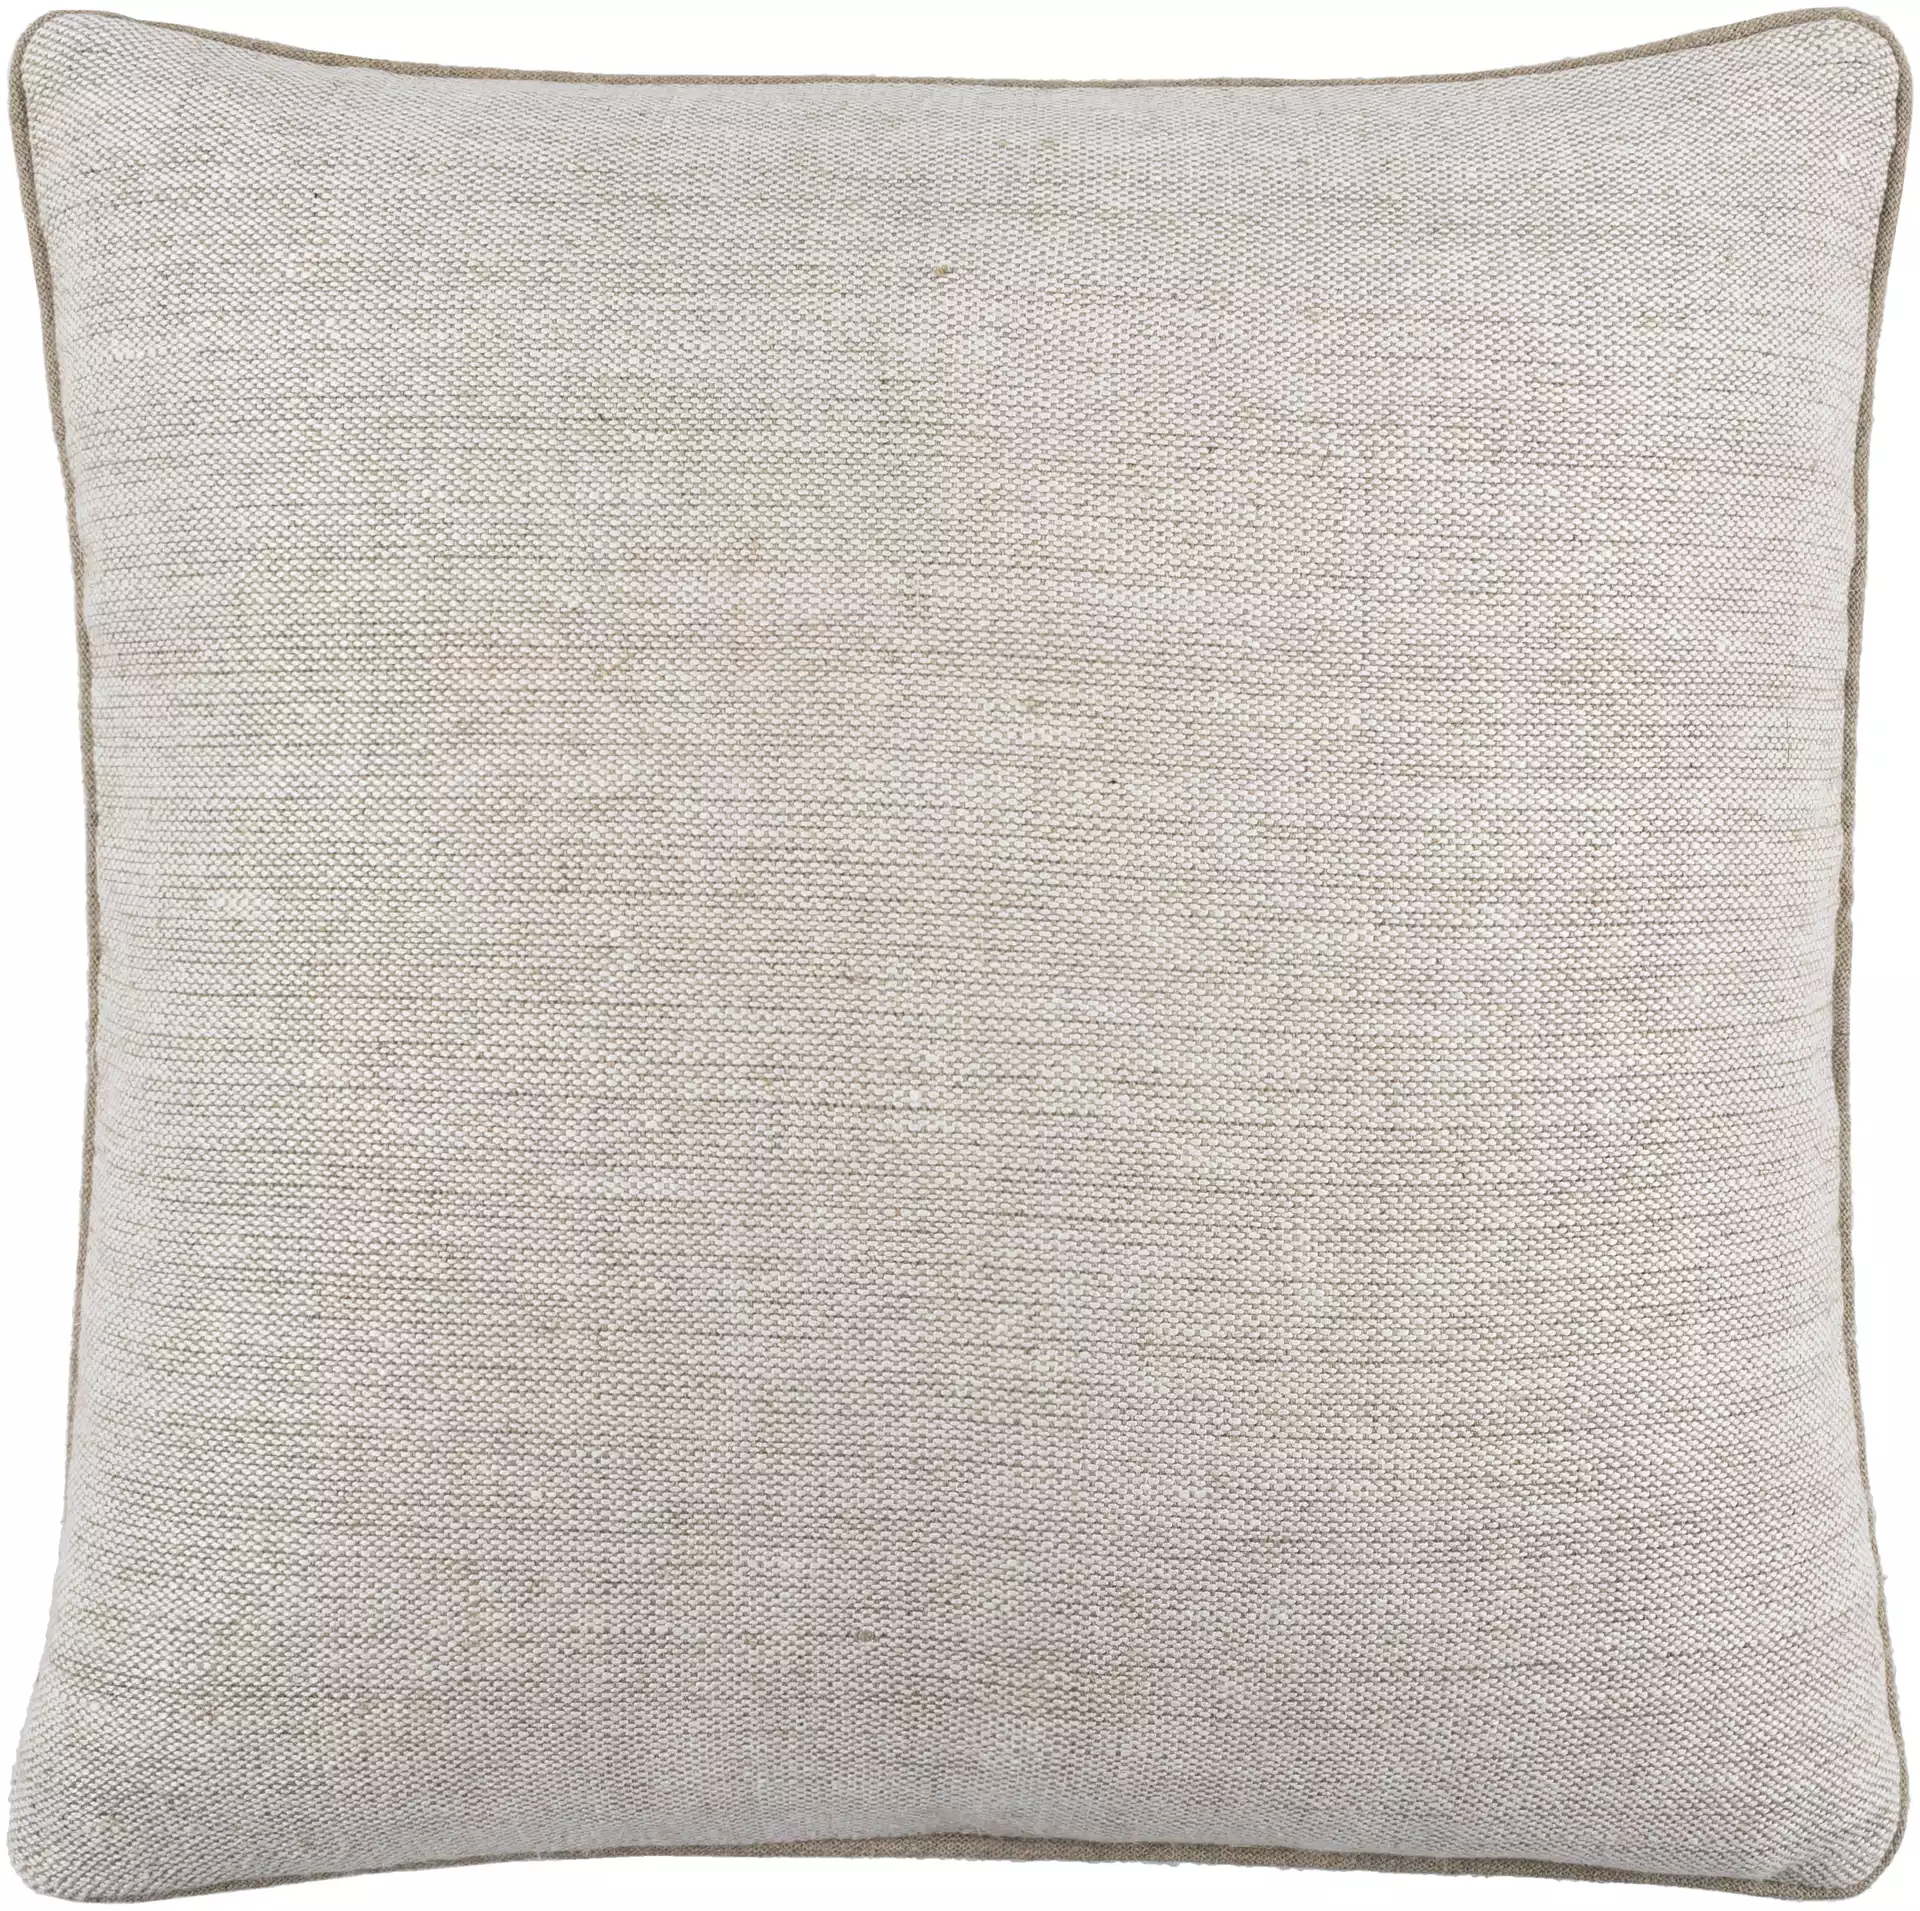 Betty, 14" x 22" Pillow with Down Insert